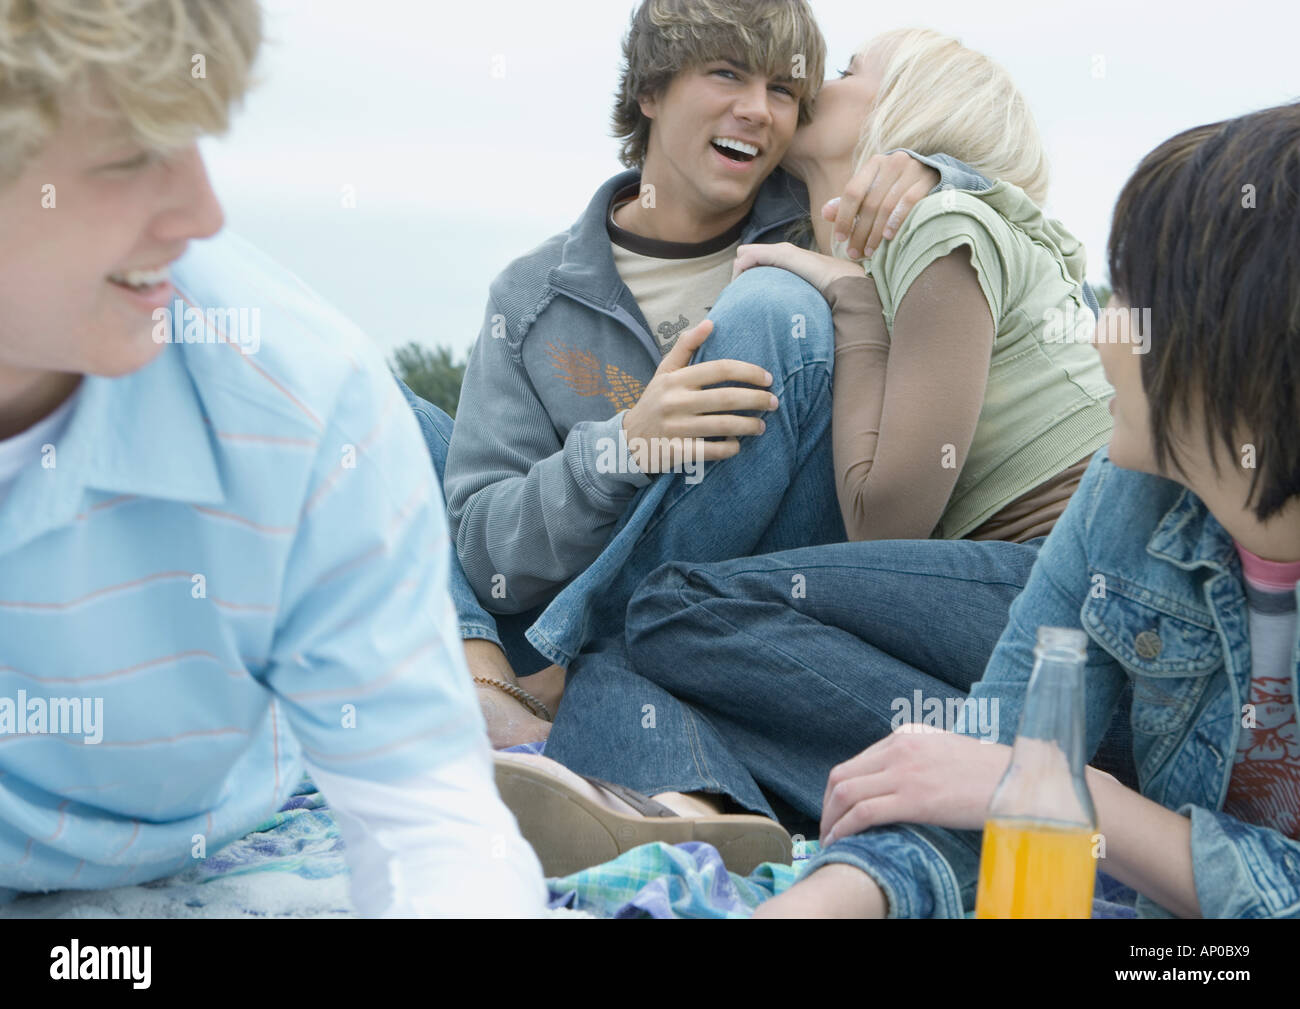 Friends hanging out together Stock Photo - Alamy